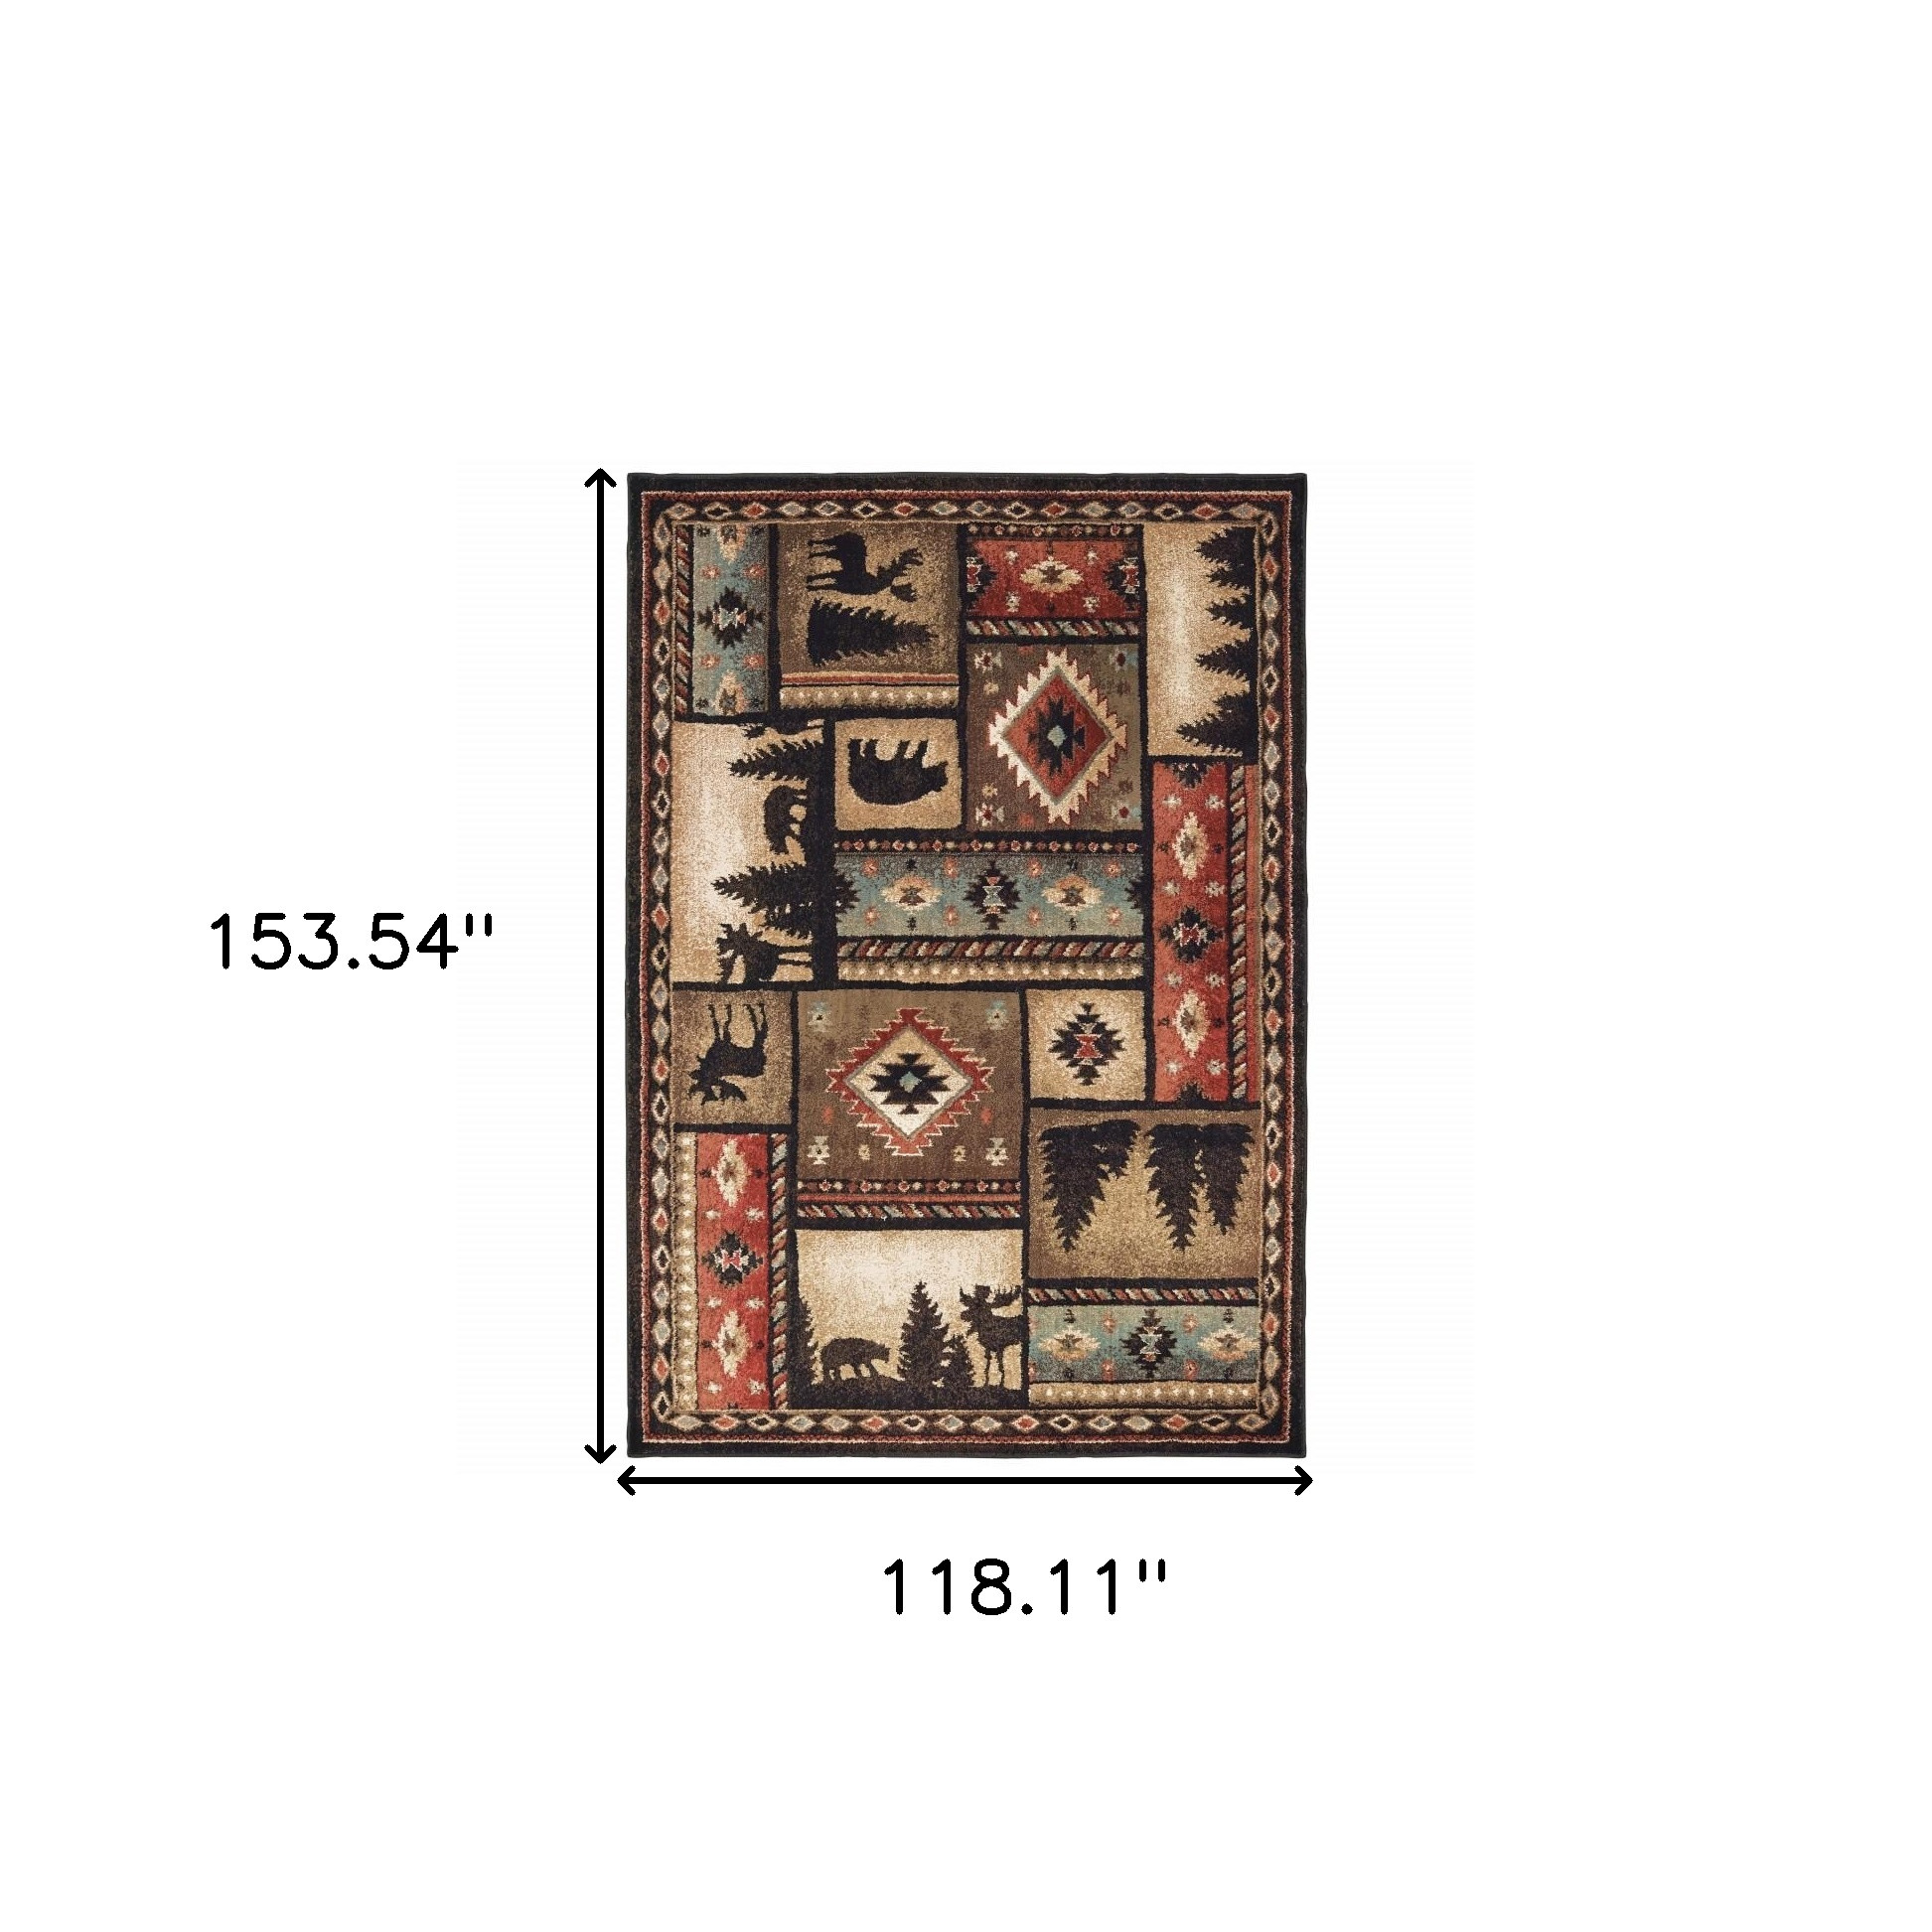 10x13 Black and Brown Nature Lodge Area Rug